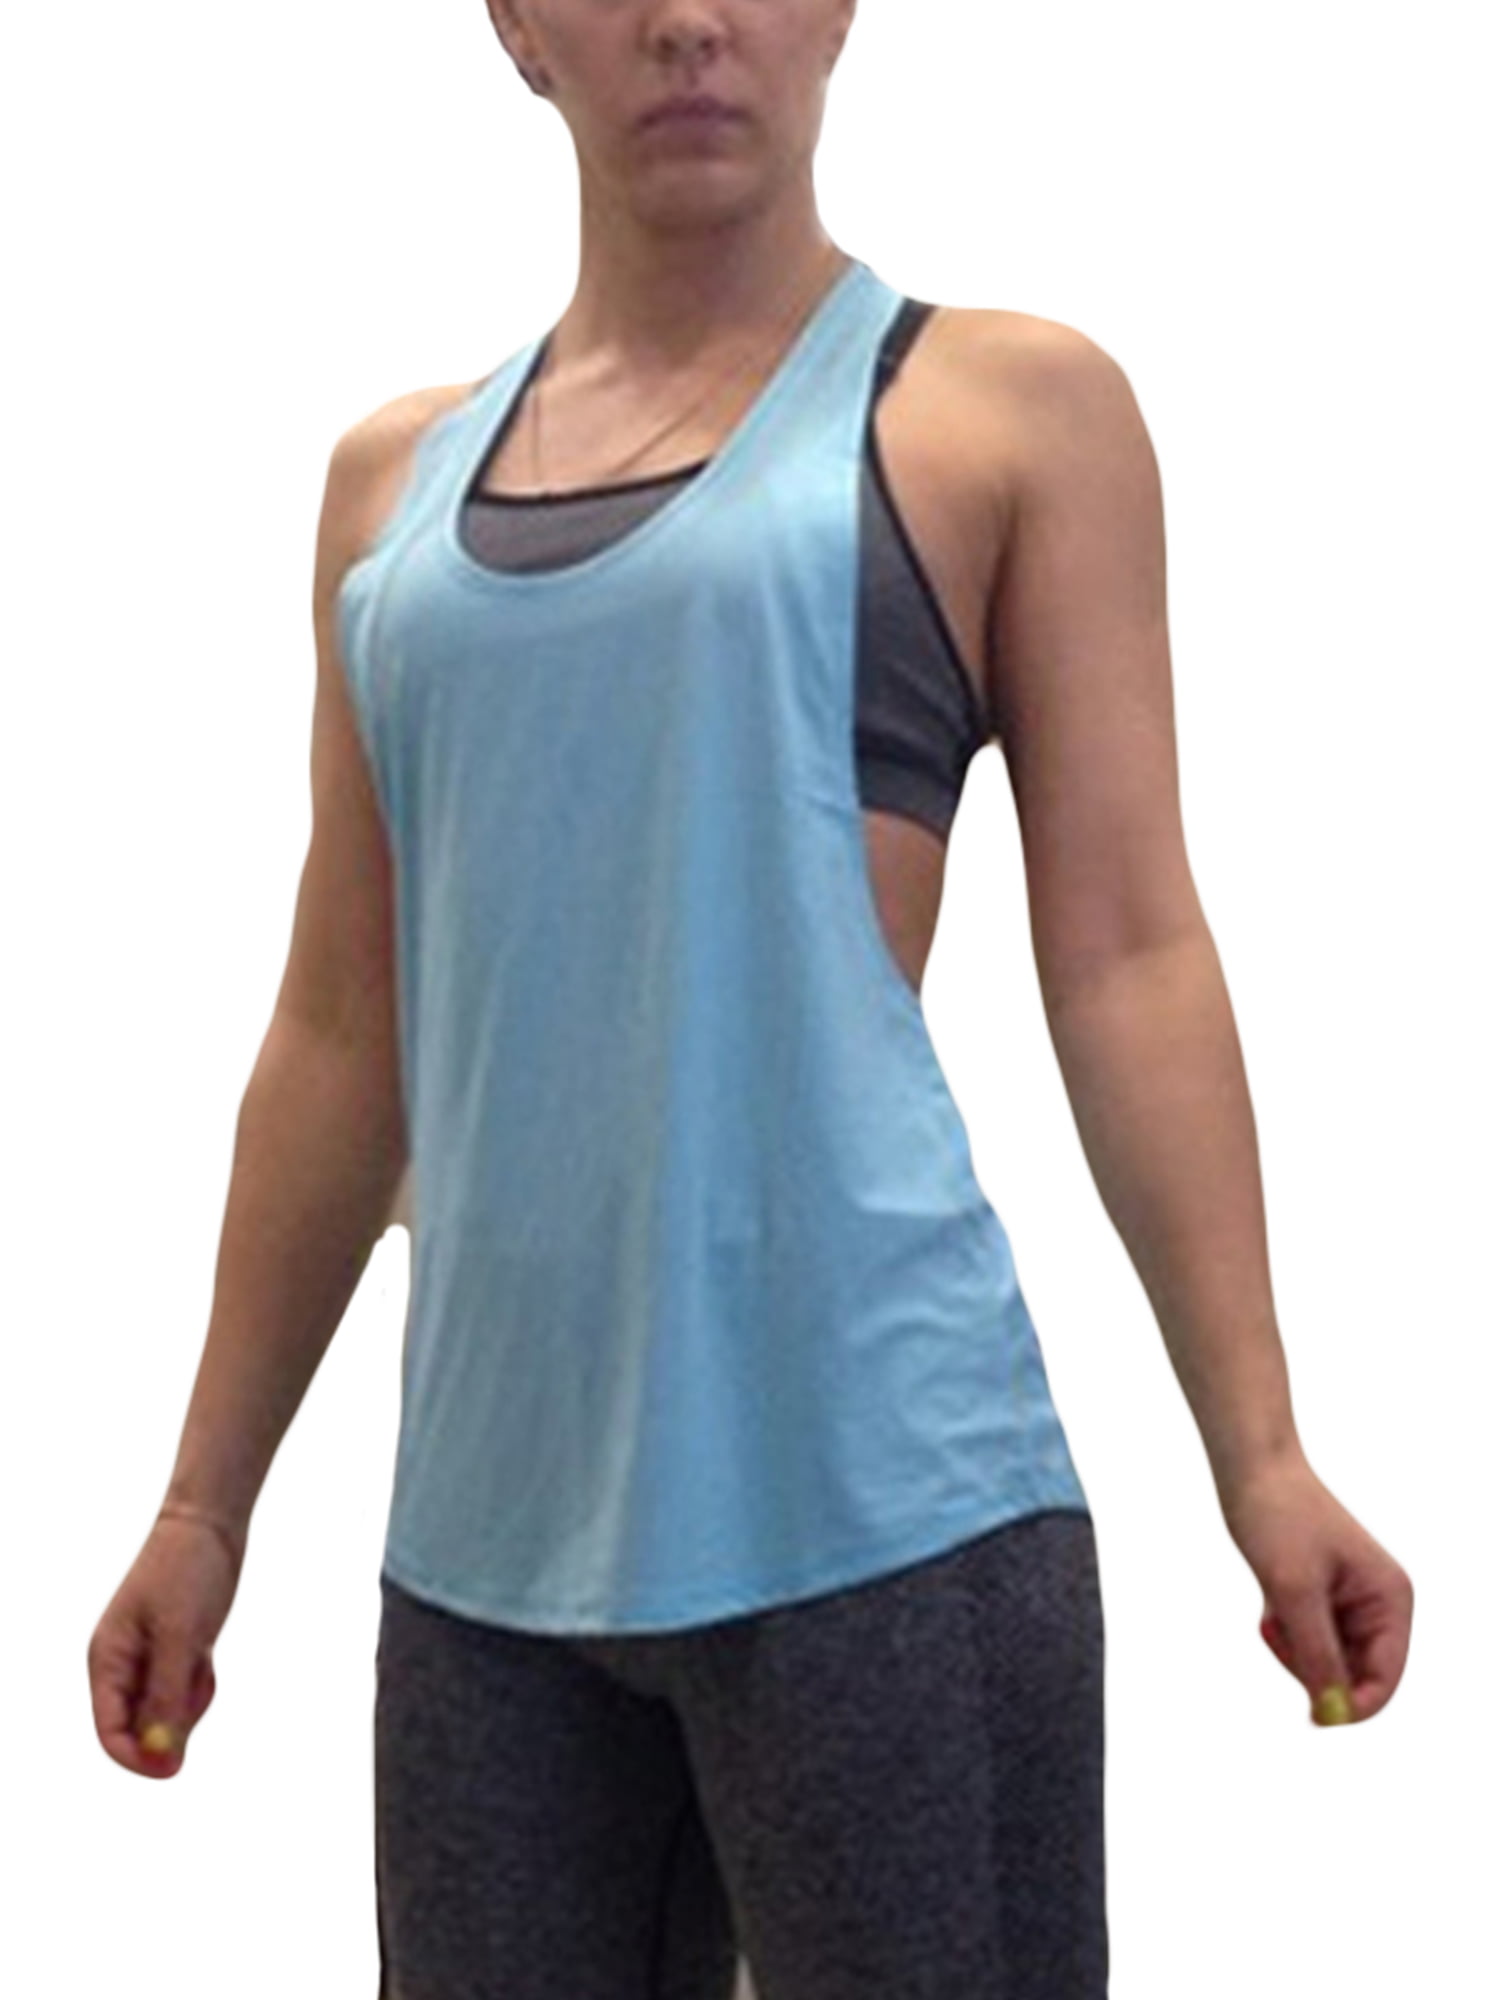 Womens Workout Tank Top T-shirt-Gym Clothes Fitness Yoga Hollow Out VEST Blouse 